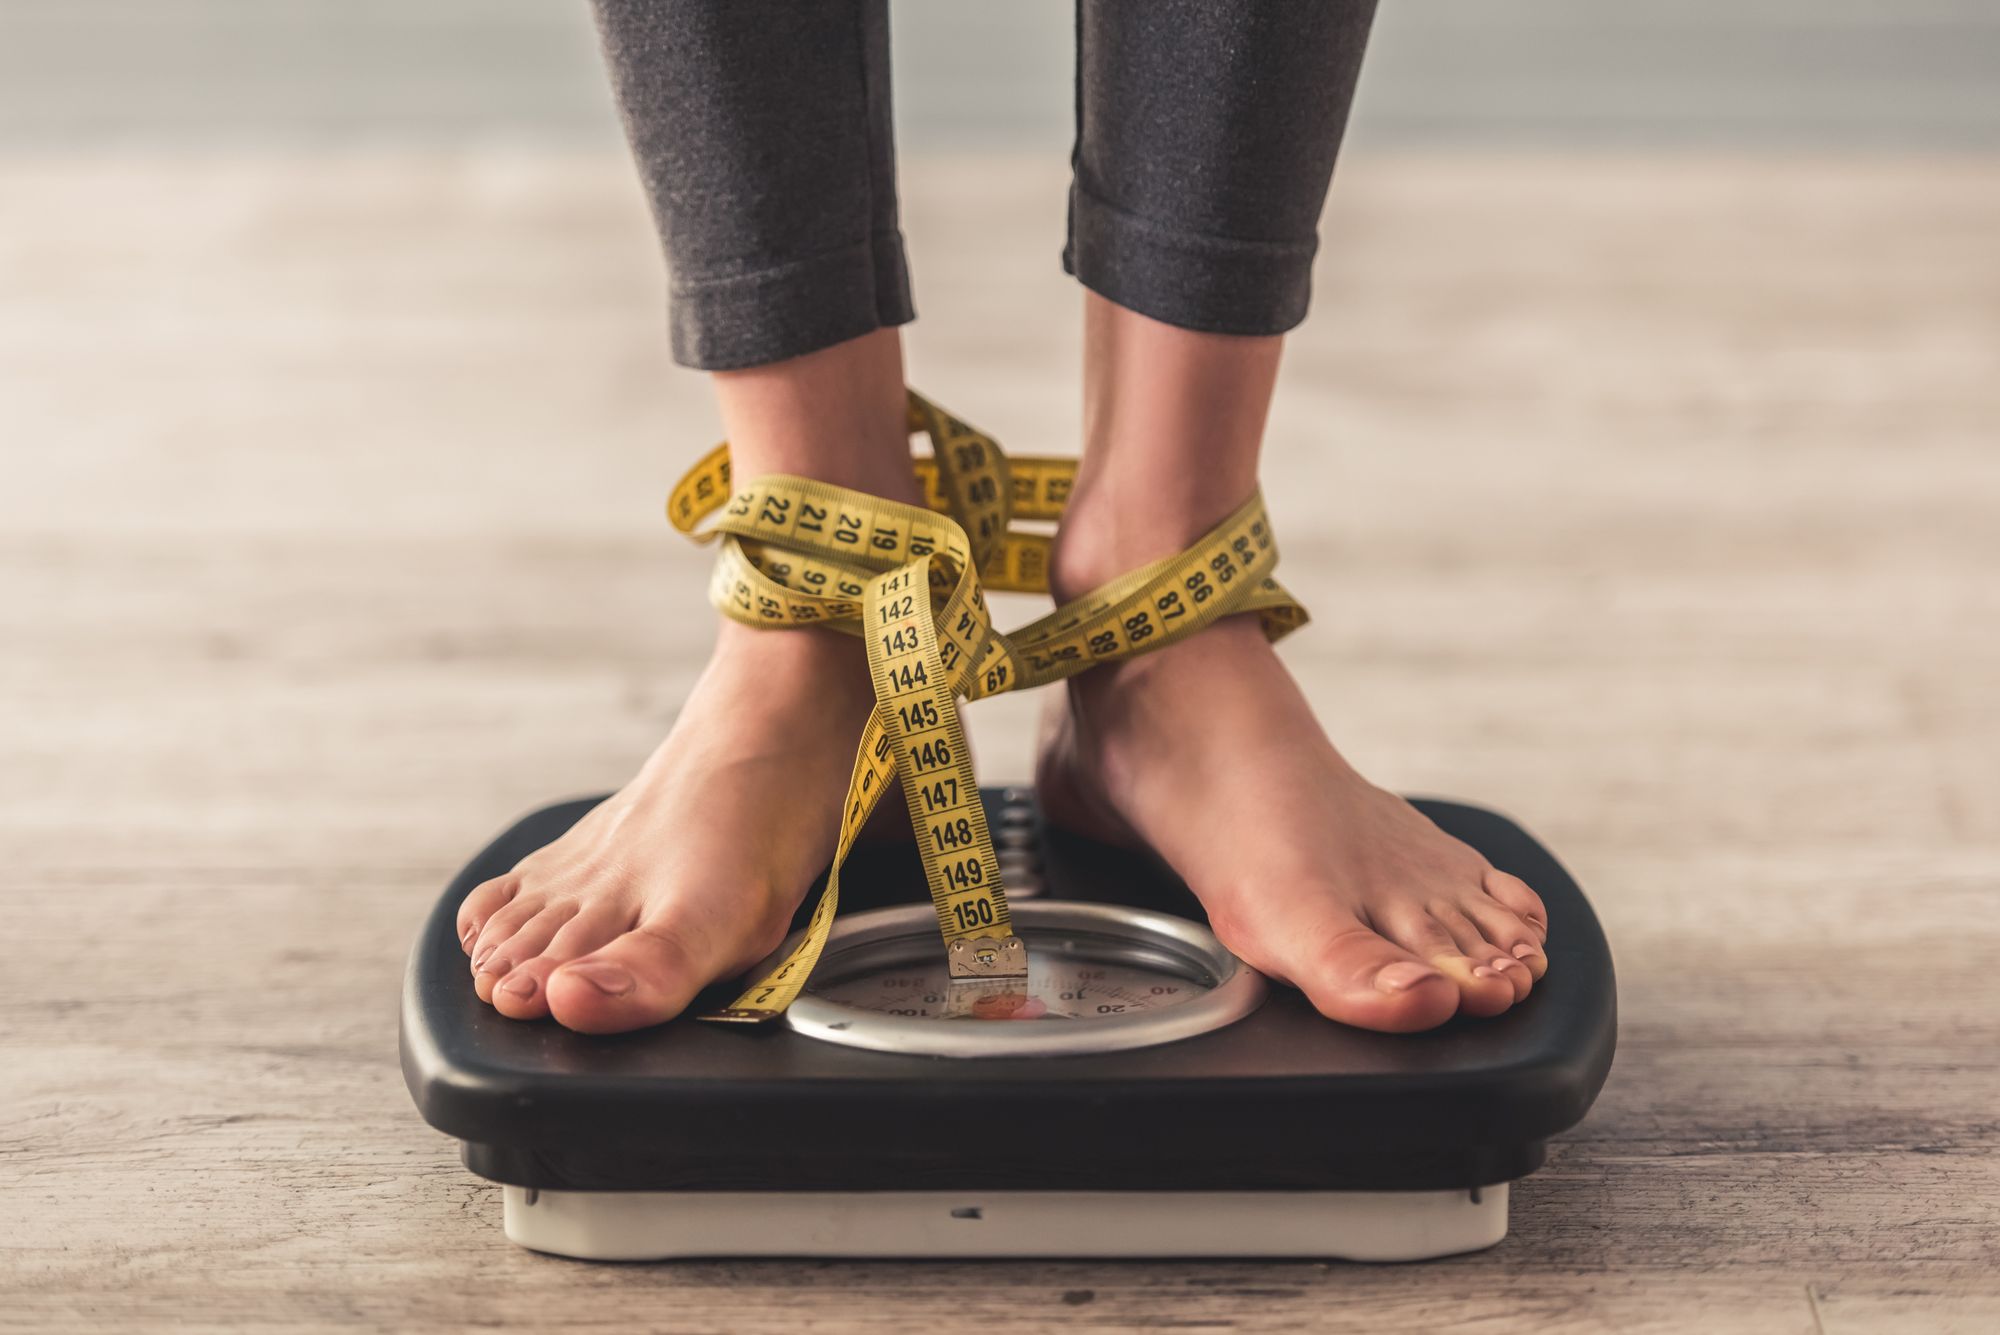 Obsession with Weight by VGstockstudio | www.shutterstock.com